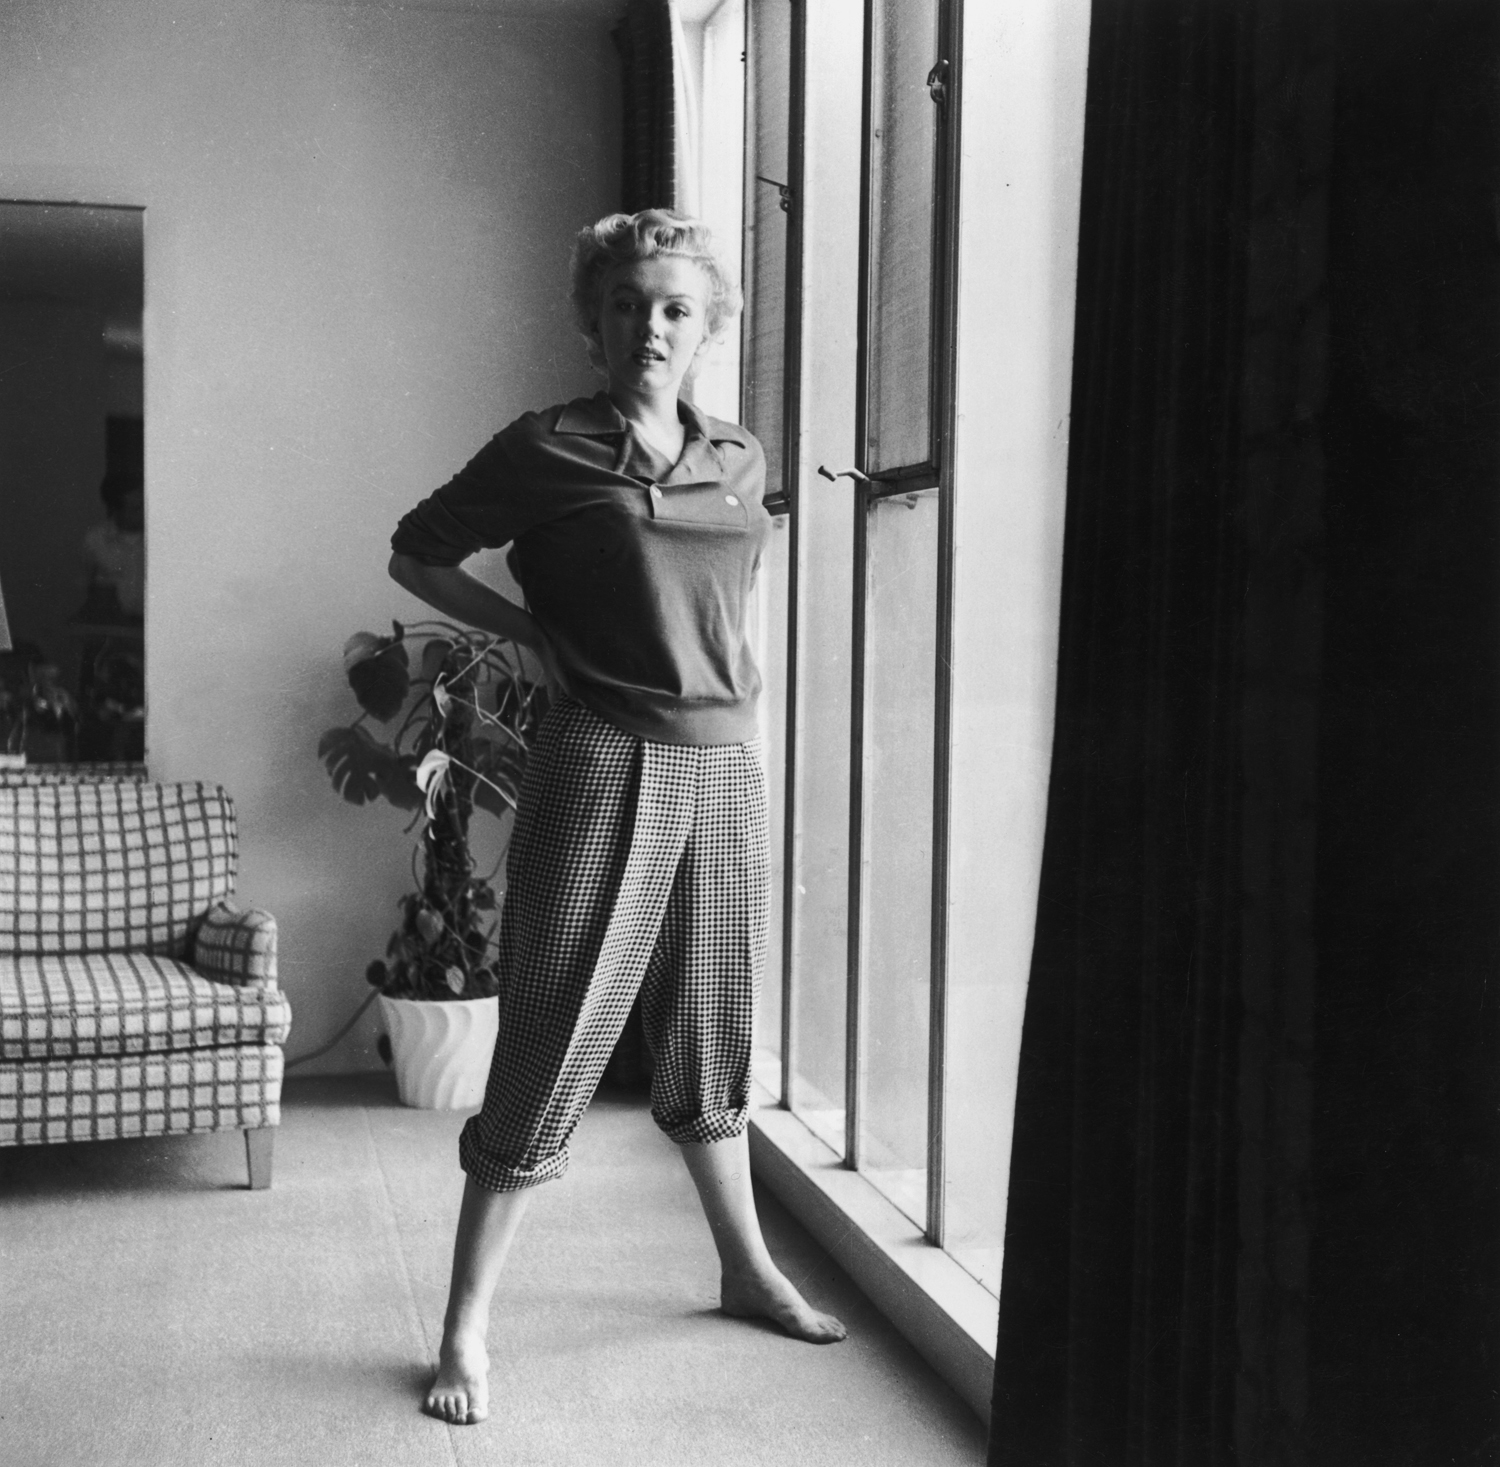 Monroe in a sweater and pants in 1955.